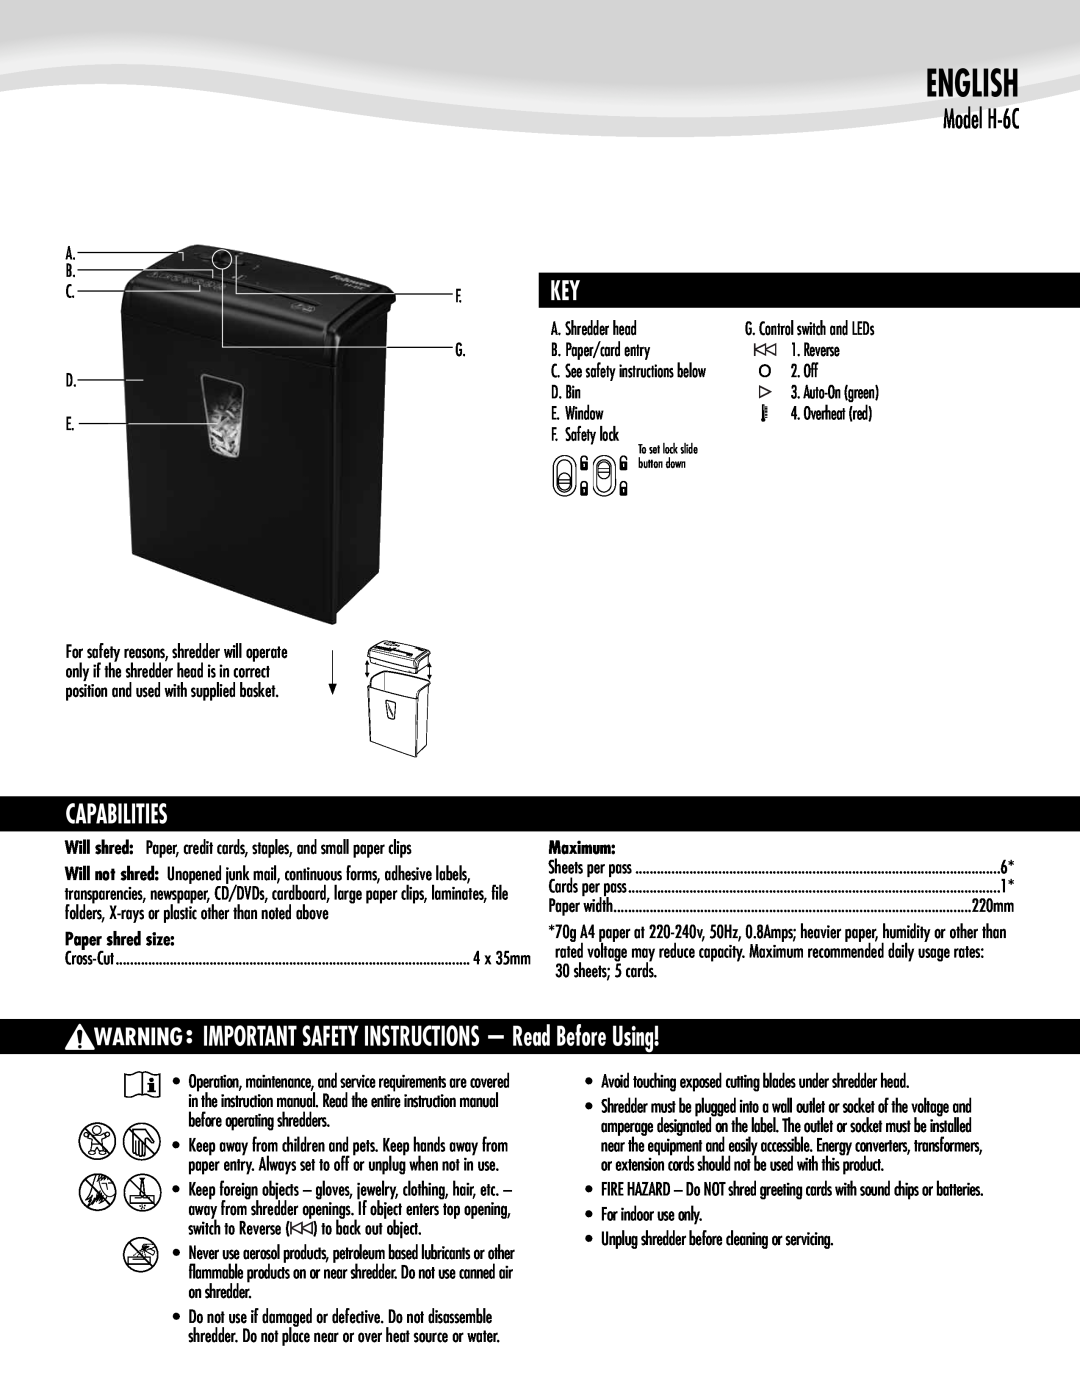 Fellowes H-6C manual F. Key, Capabilities, IMPORTANT SAFETY INSTRUCTIONS - Read Before Using, Paper shred size, English 